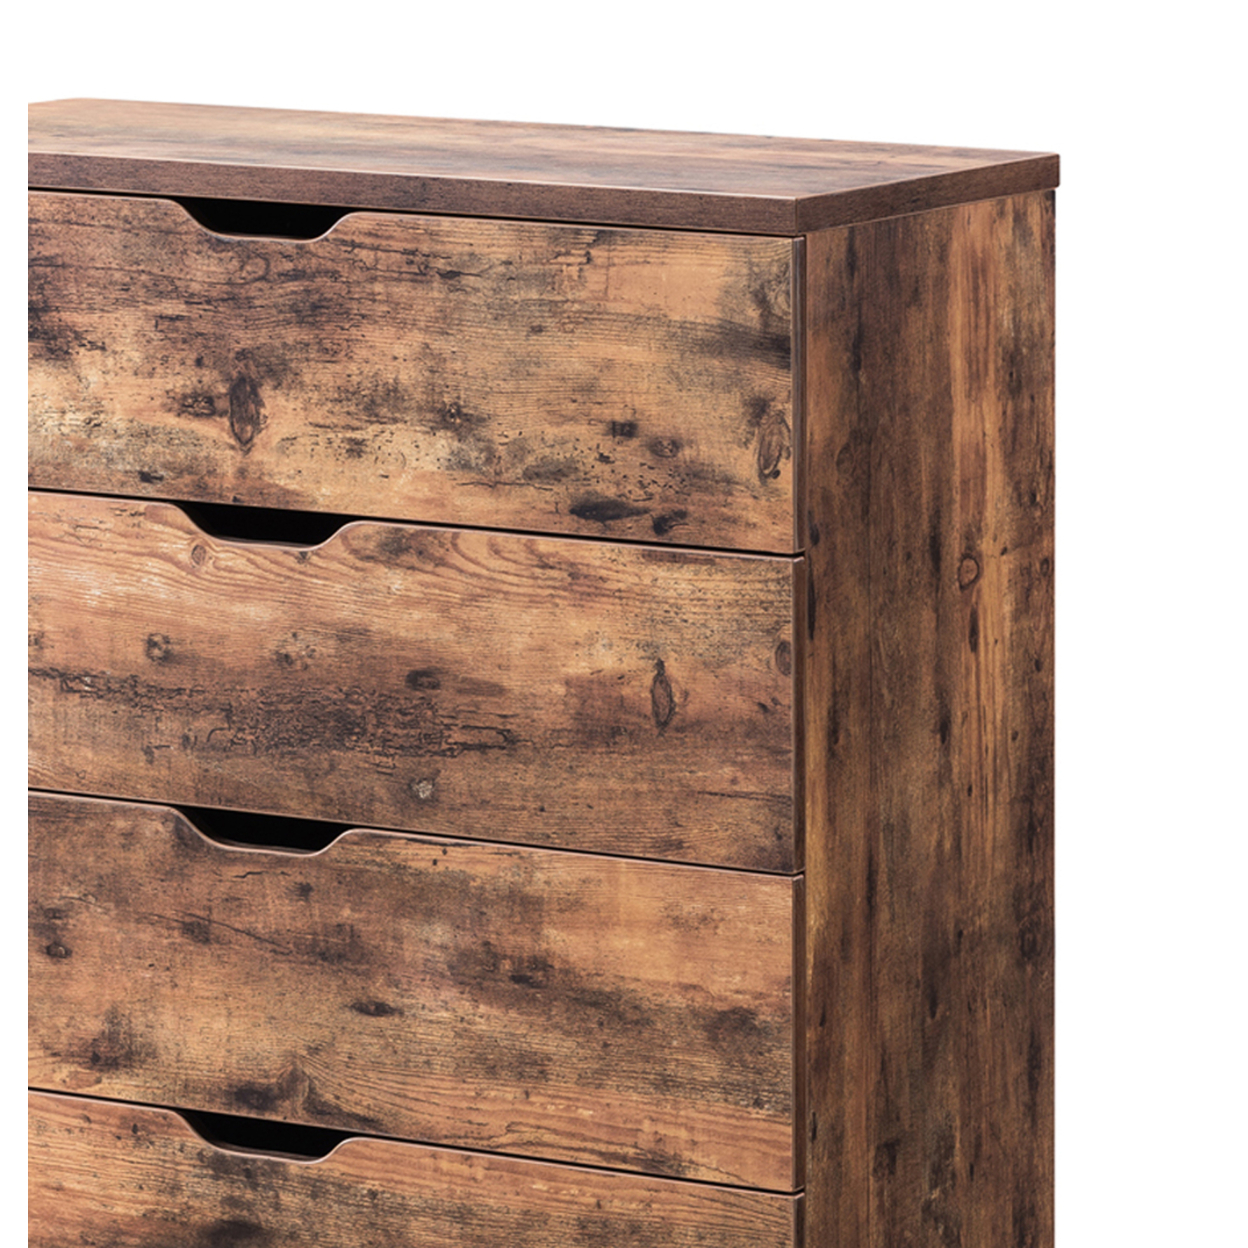 Commodious Five Drawers Wooden Utility Chest With Metal Glides, Brown- Saltoro Sherpi